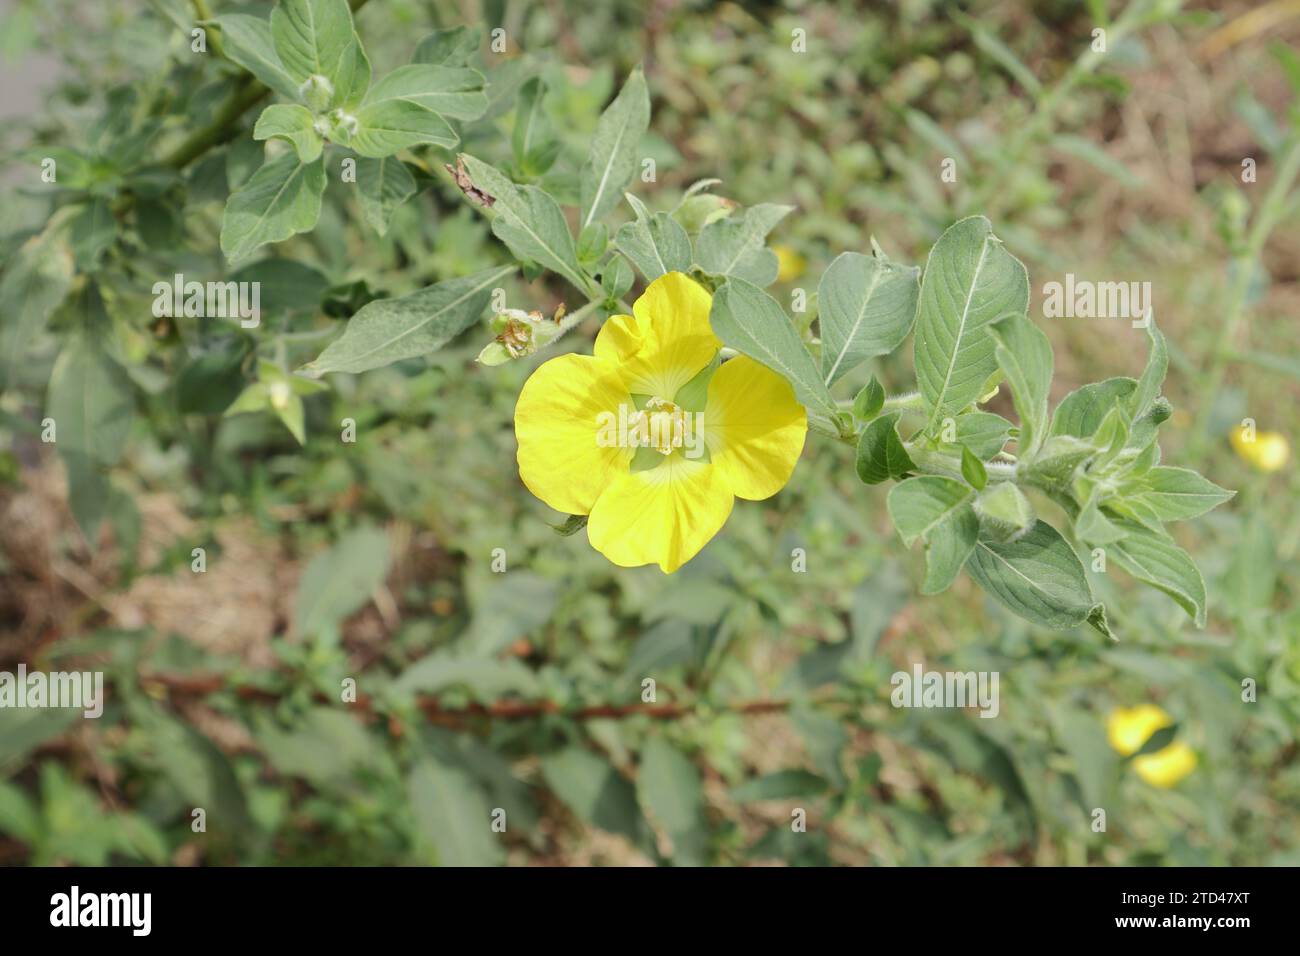 Overhead view of a beautiful four petaled Peruvian primrose willow flower blooms on a twig growing near a paddy field. This densely growing common wee Stock Photo